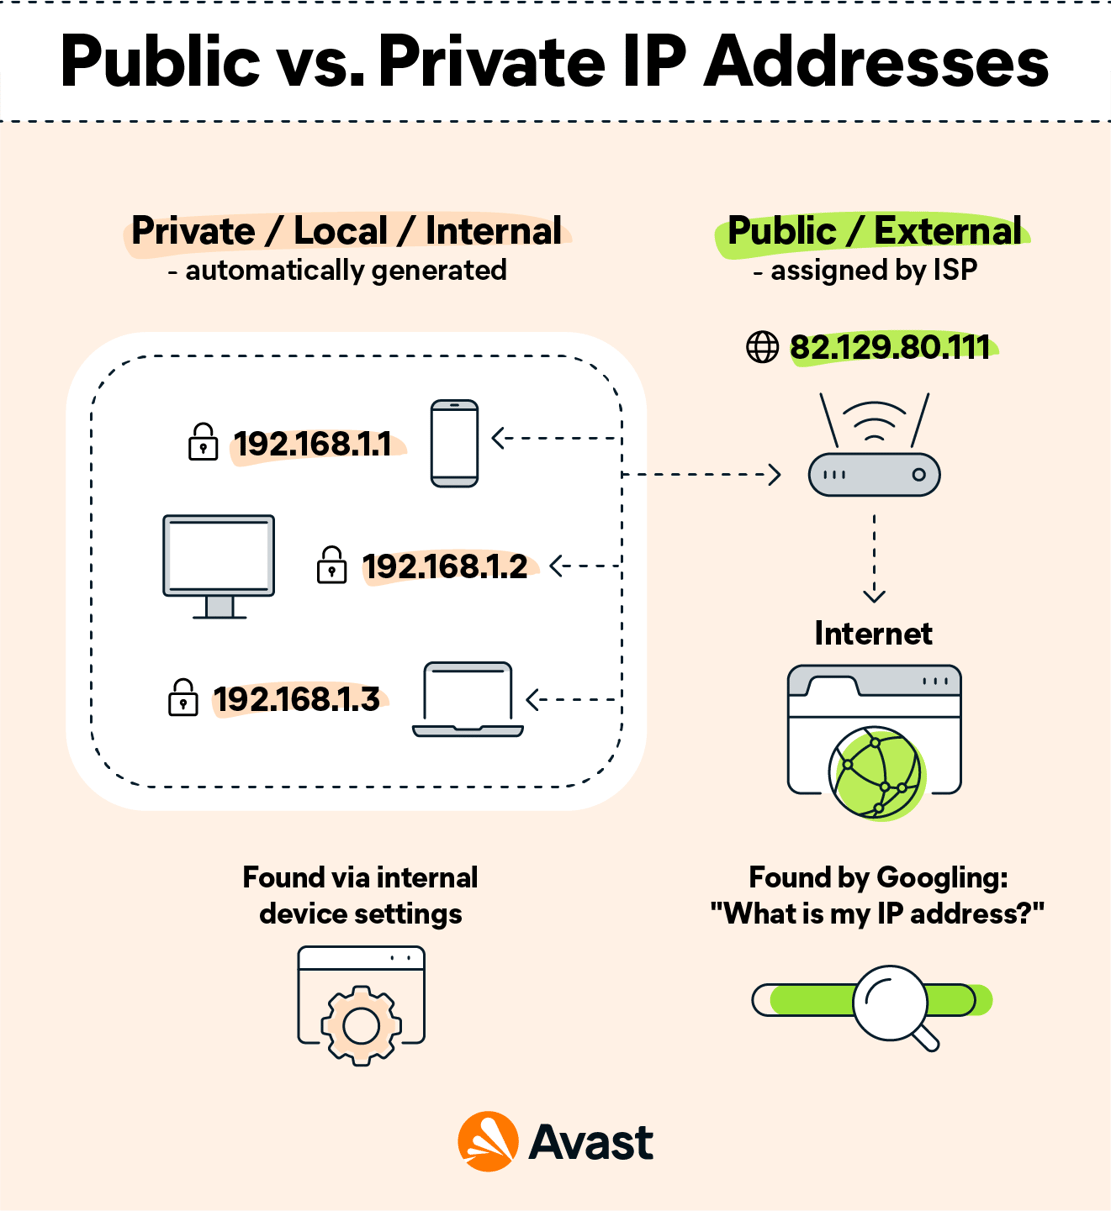 Does public IP address change with location?